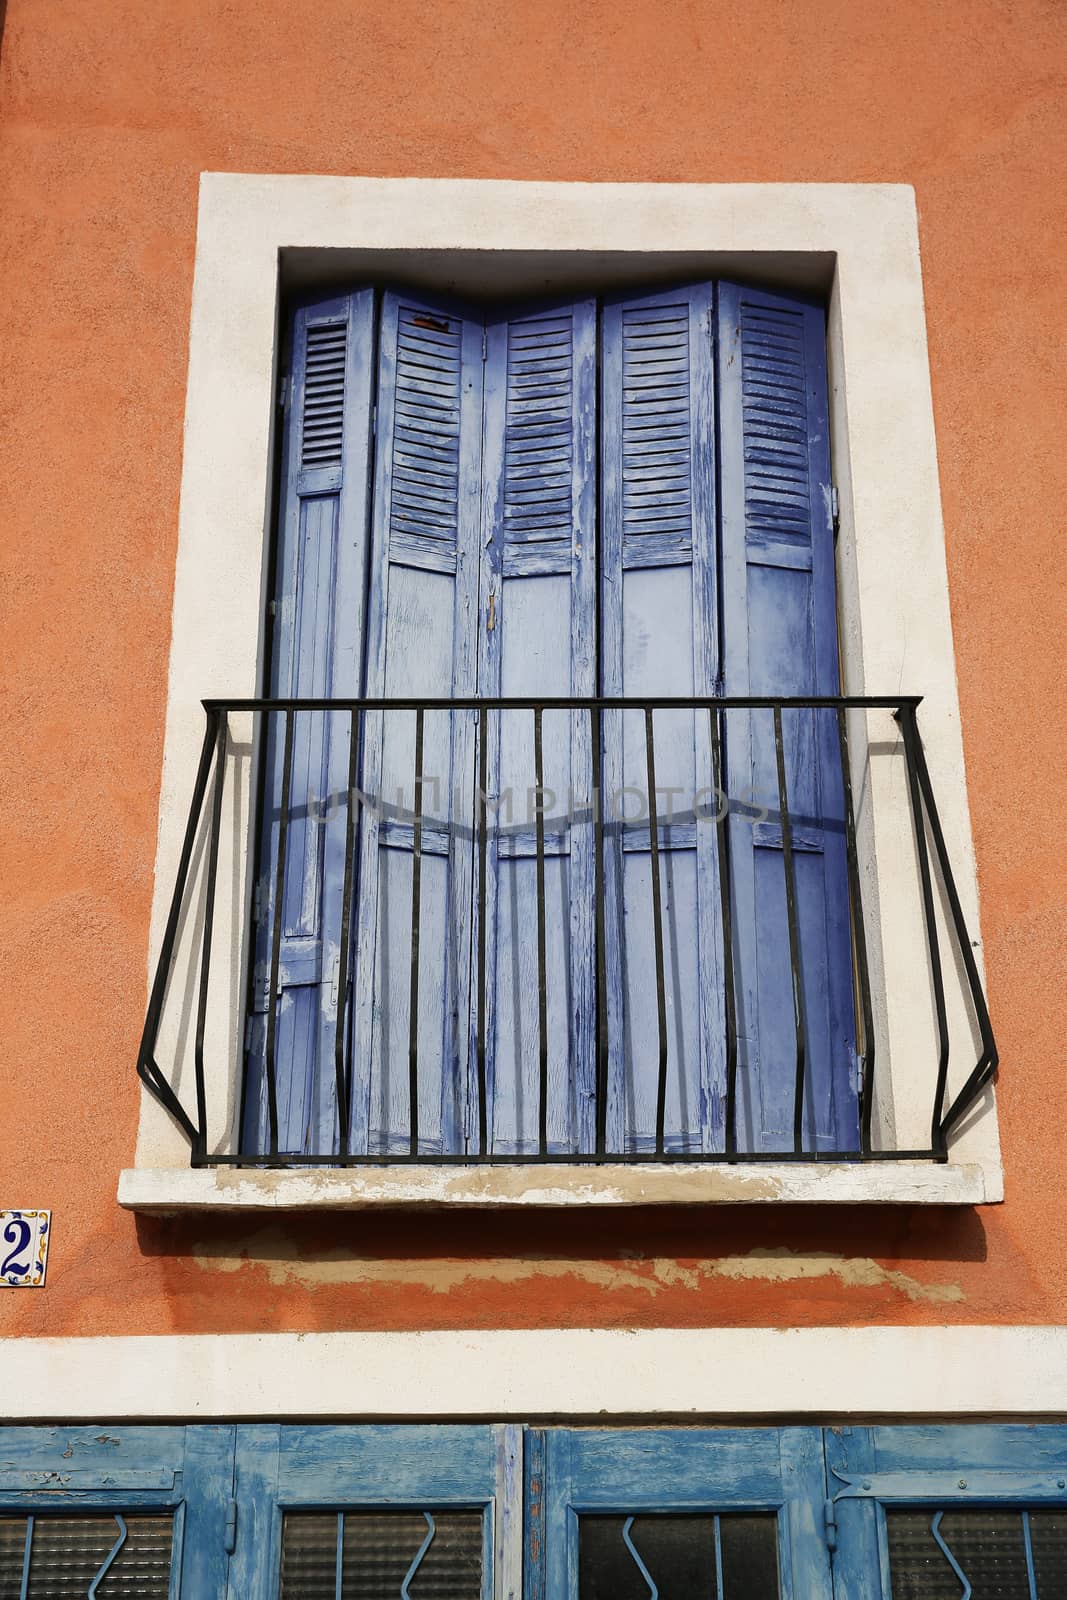 Traditional French Windows With Purple Shutters
